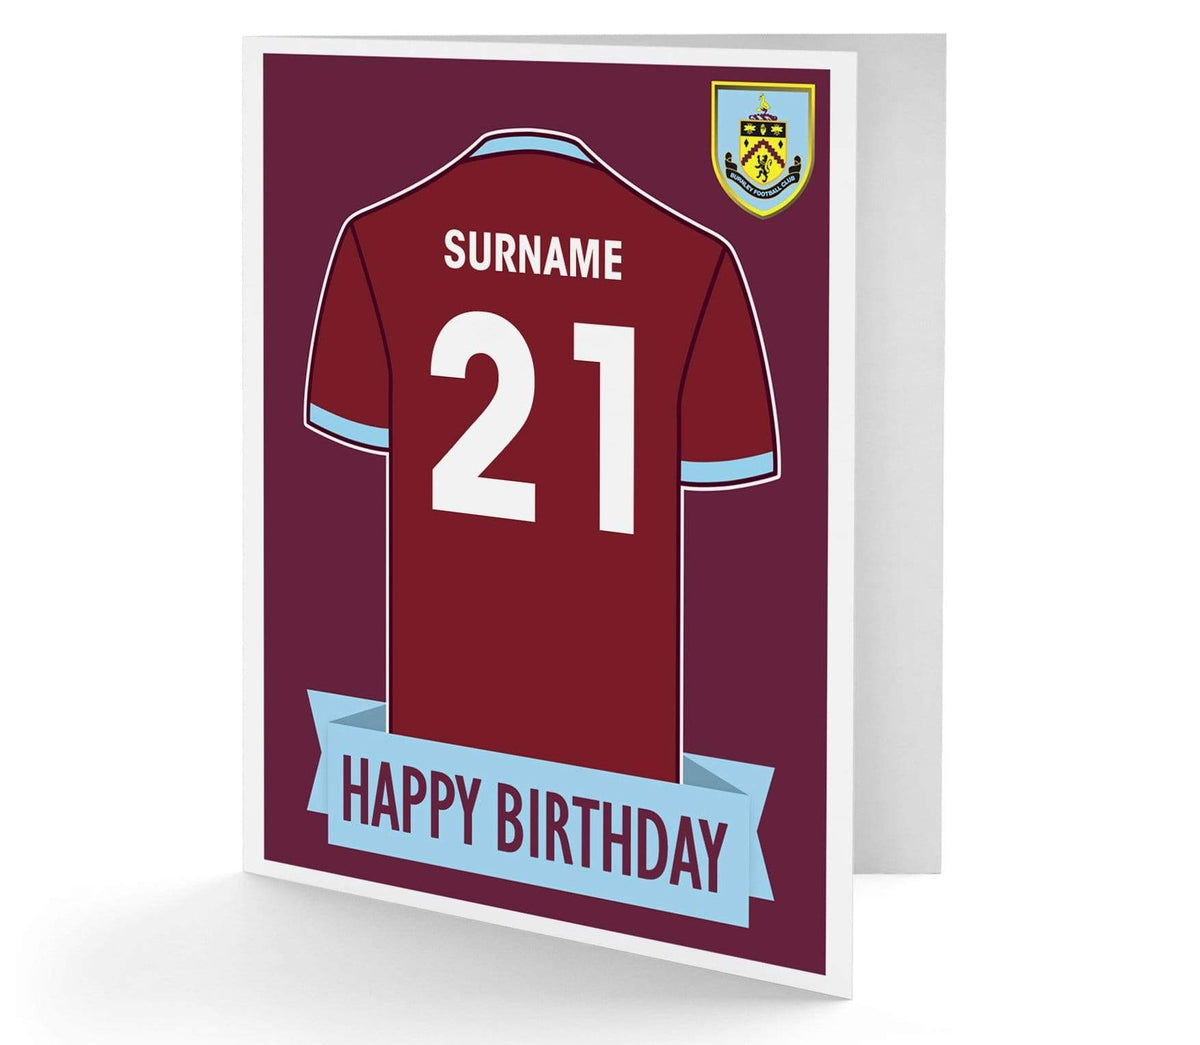 Personalised Burnley Birthday Card - Any Name And Number. Official